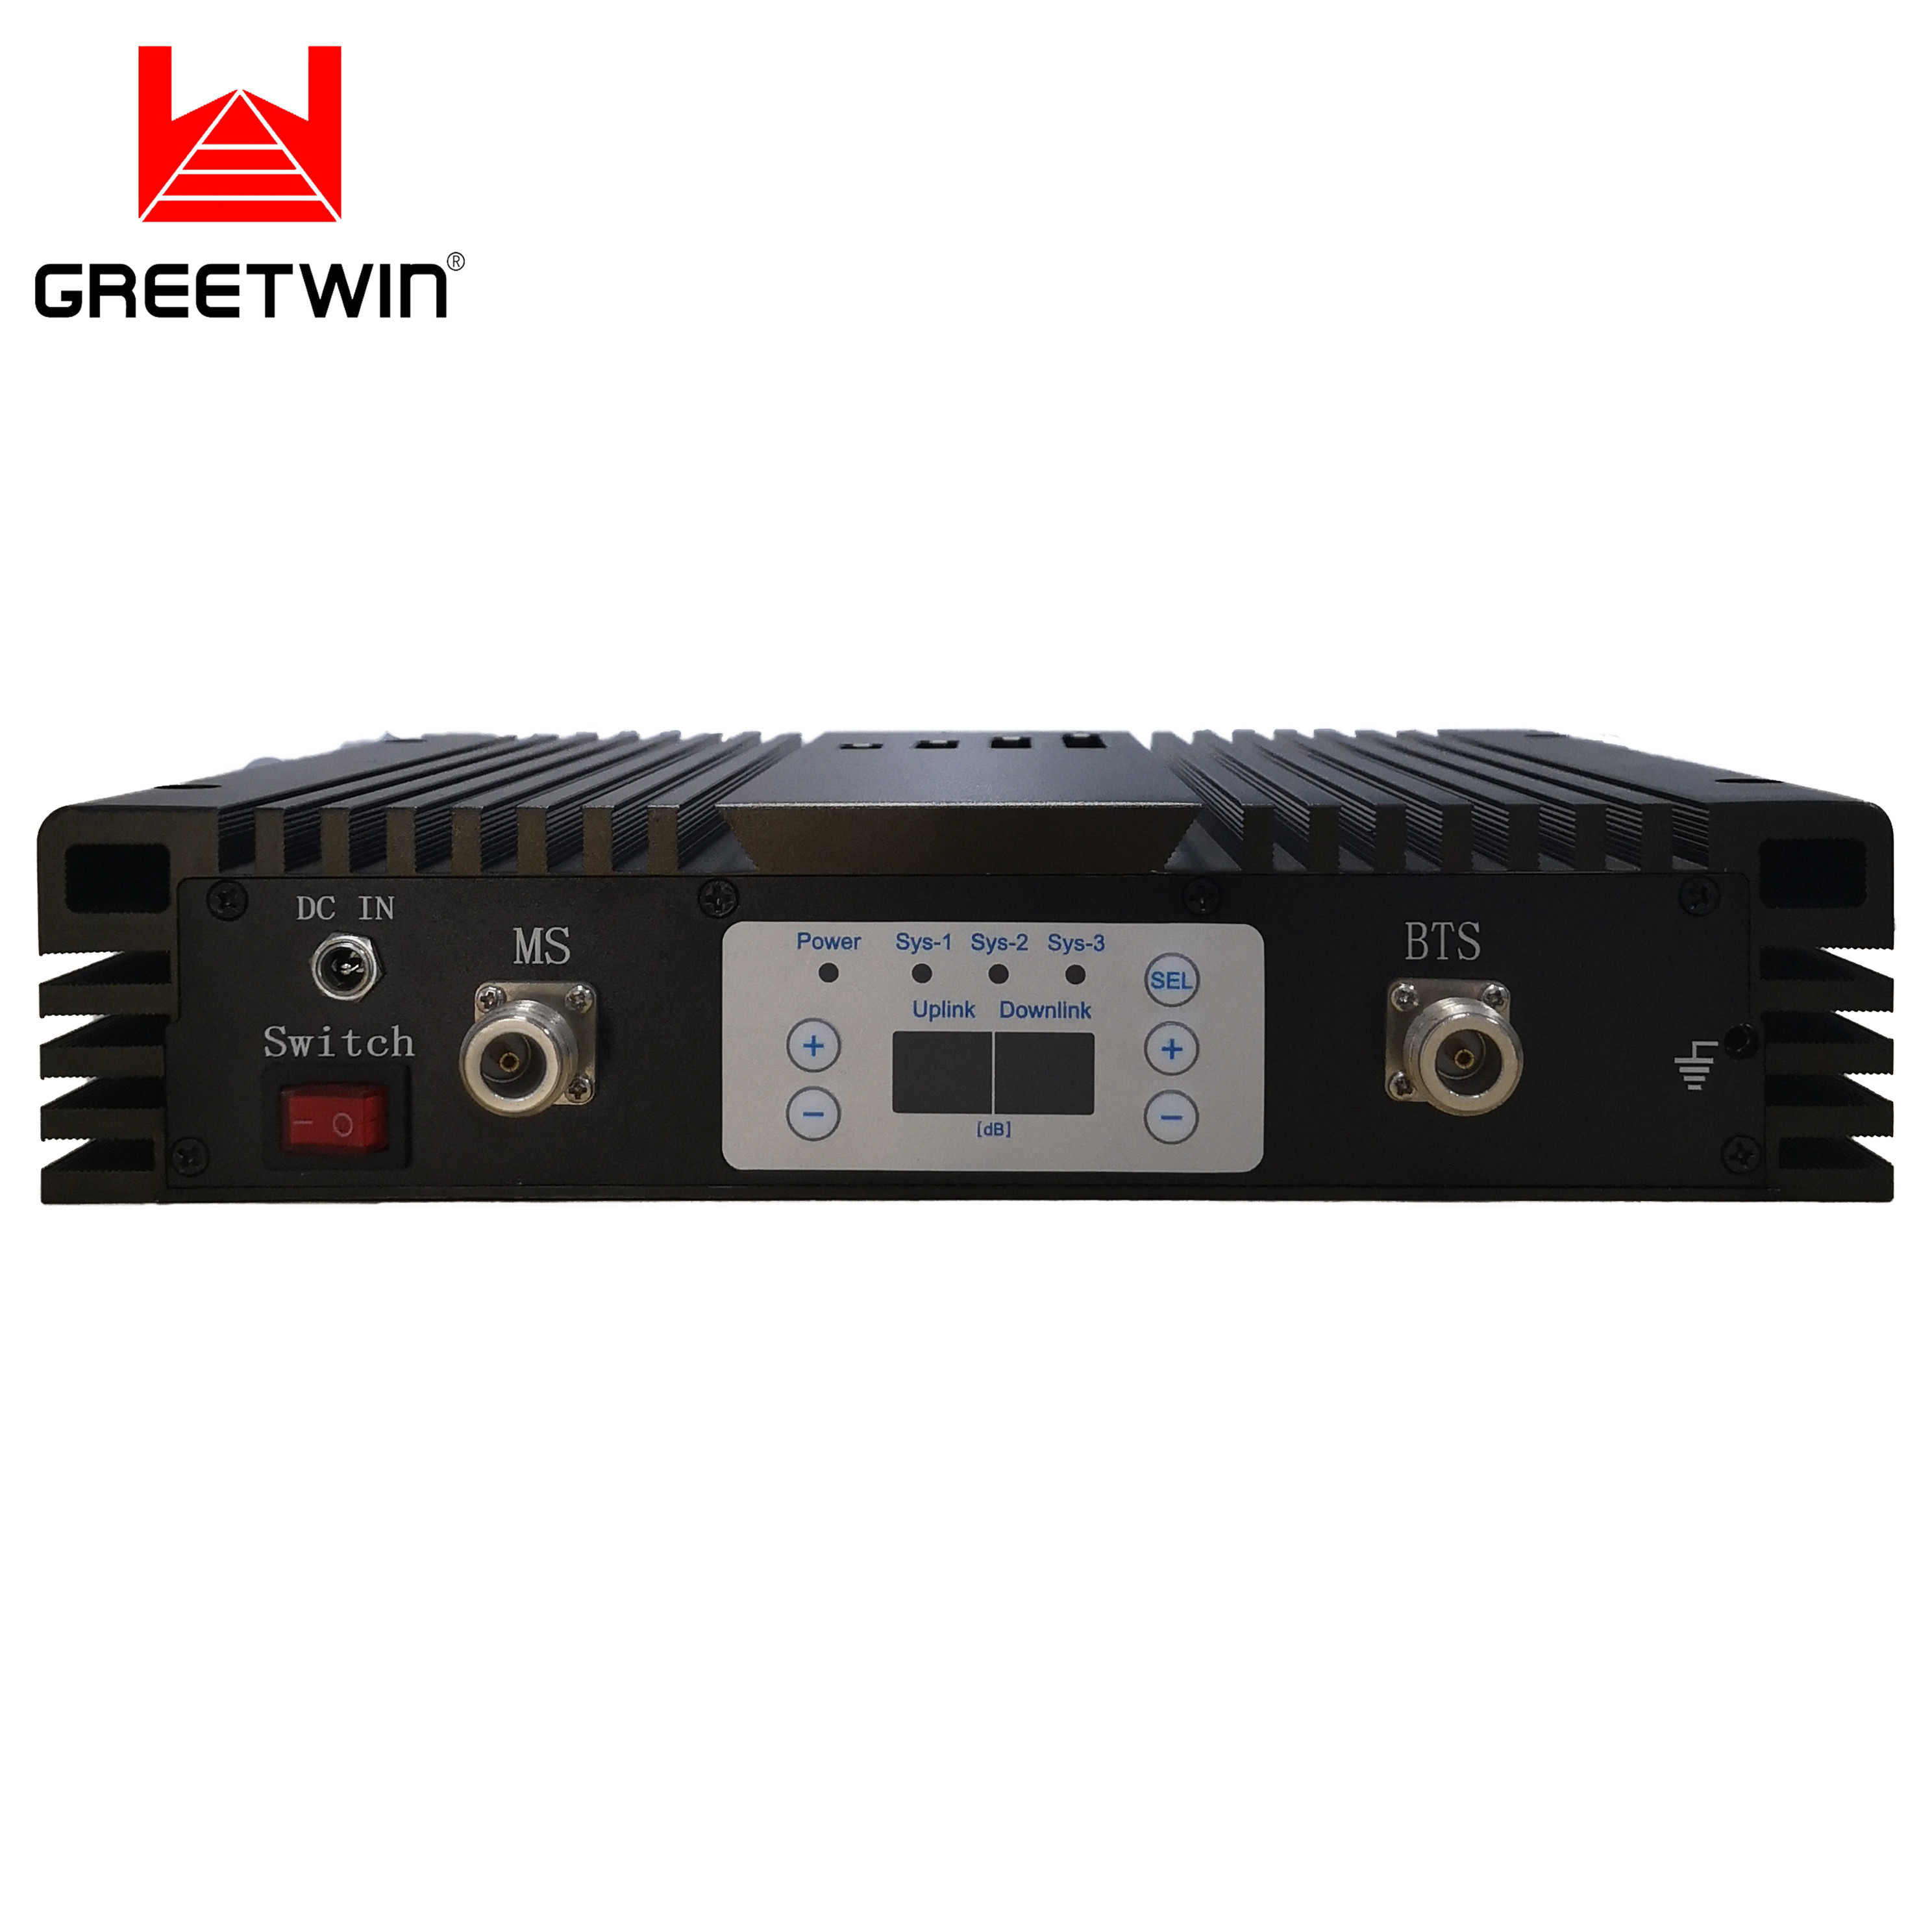 Dcs1800 25W 80dB Gain 1800MHz Mobile Signal Repeater